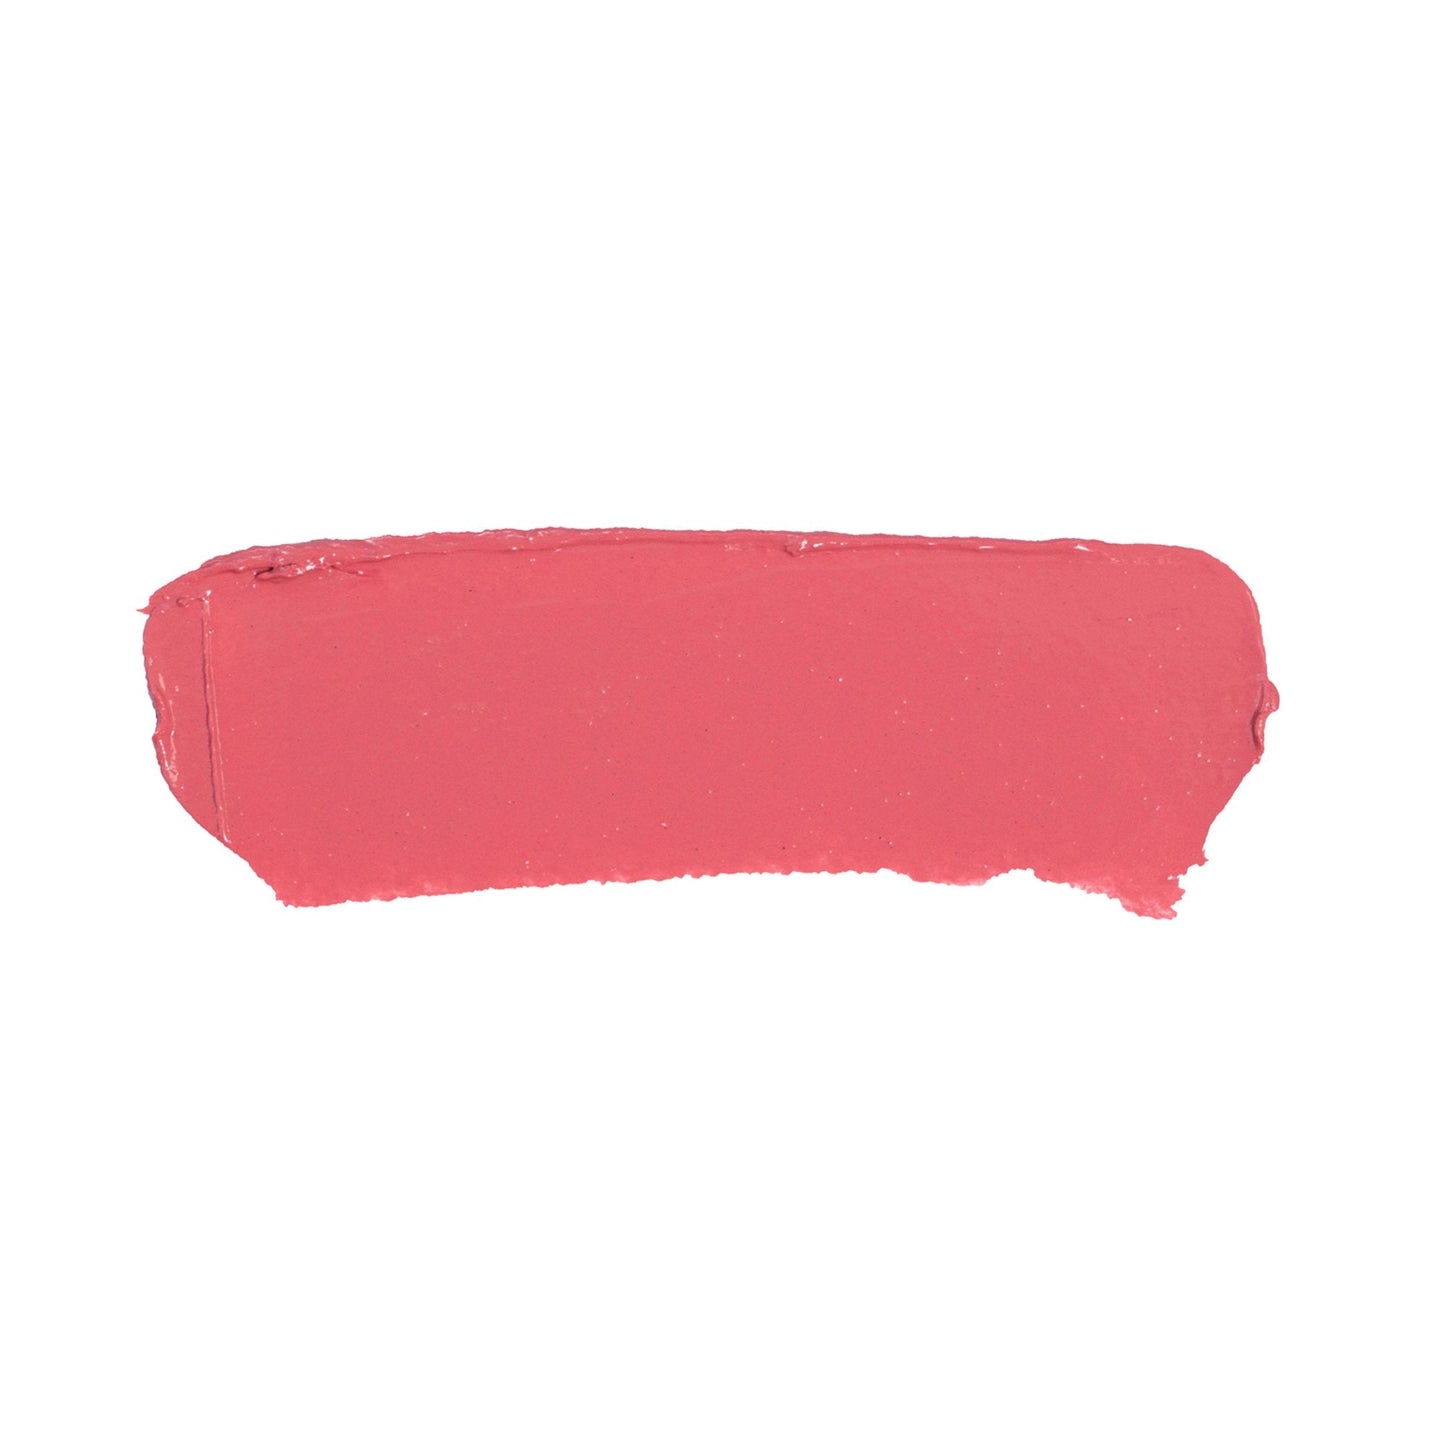 Gel Color Lip and Cheek Balm in shade rebel texture swatch